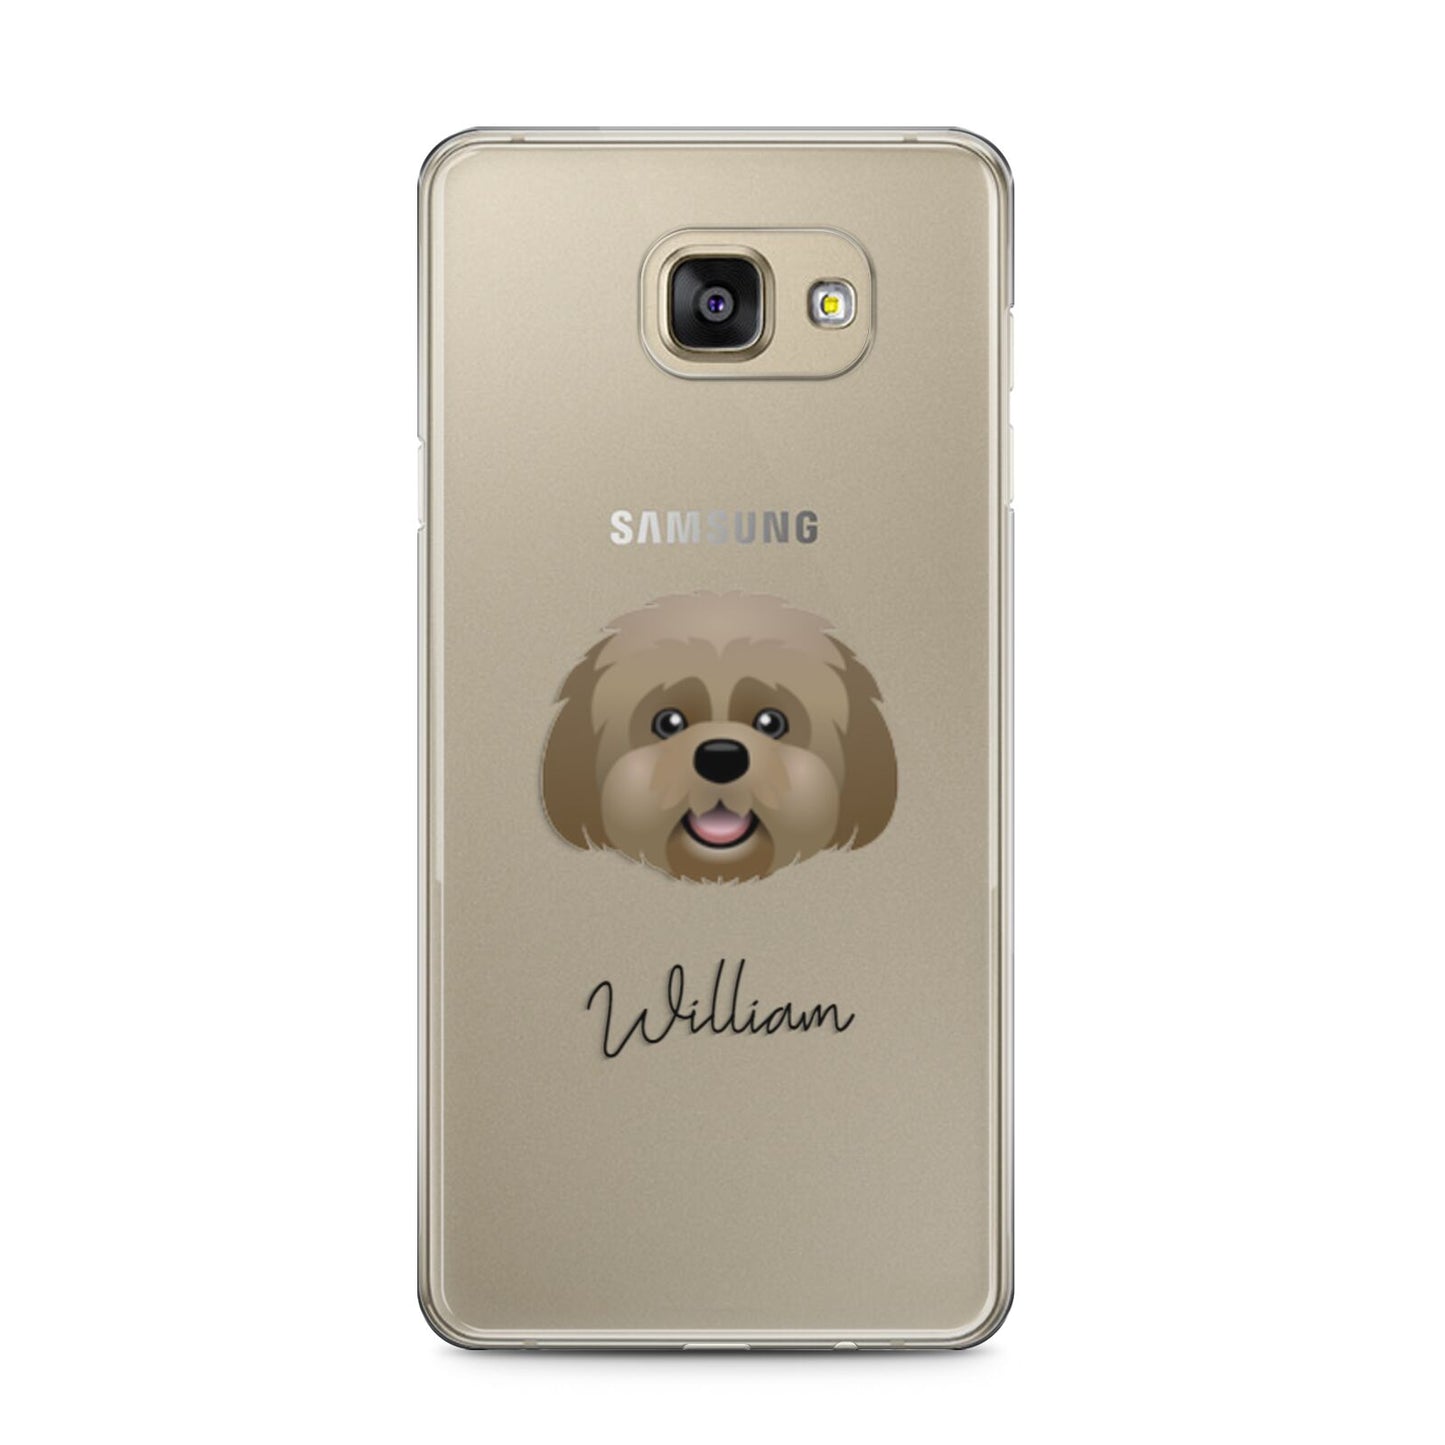 Lhatese Personalised Samsung Galaxy A5 2016 Case on gold phone